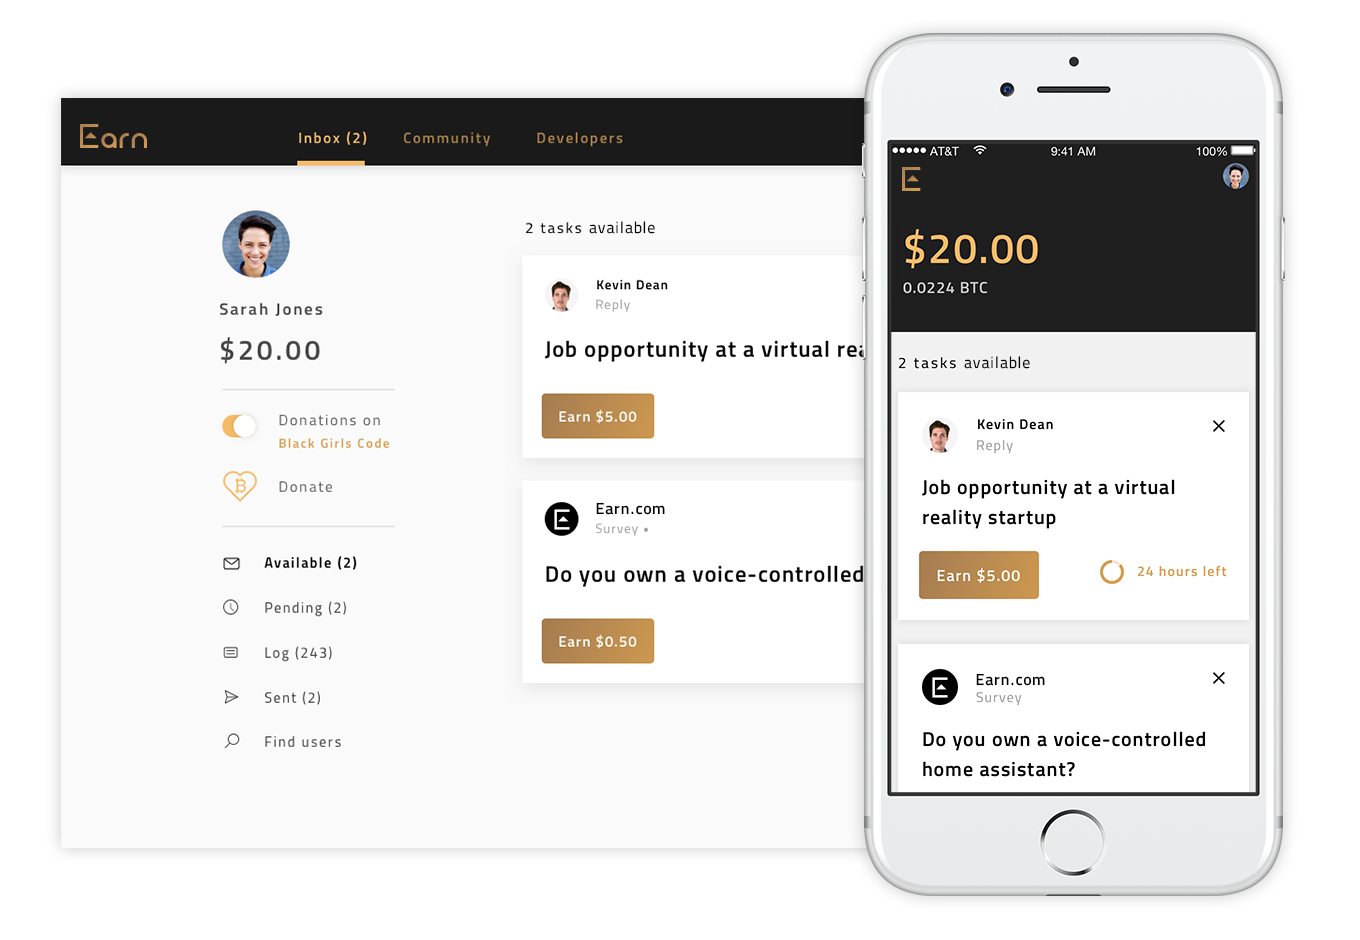 Earn.com is a cryptocurrencies product that allows users to earn digital currency for replying to emails and completing tasks.